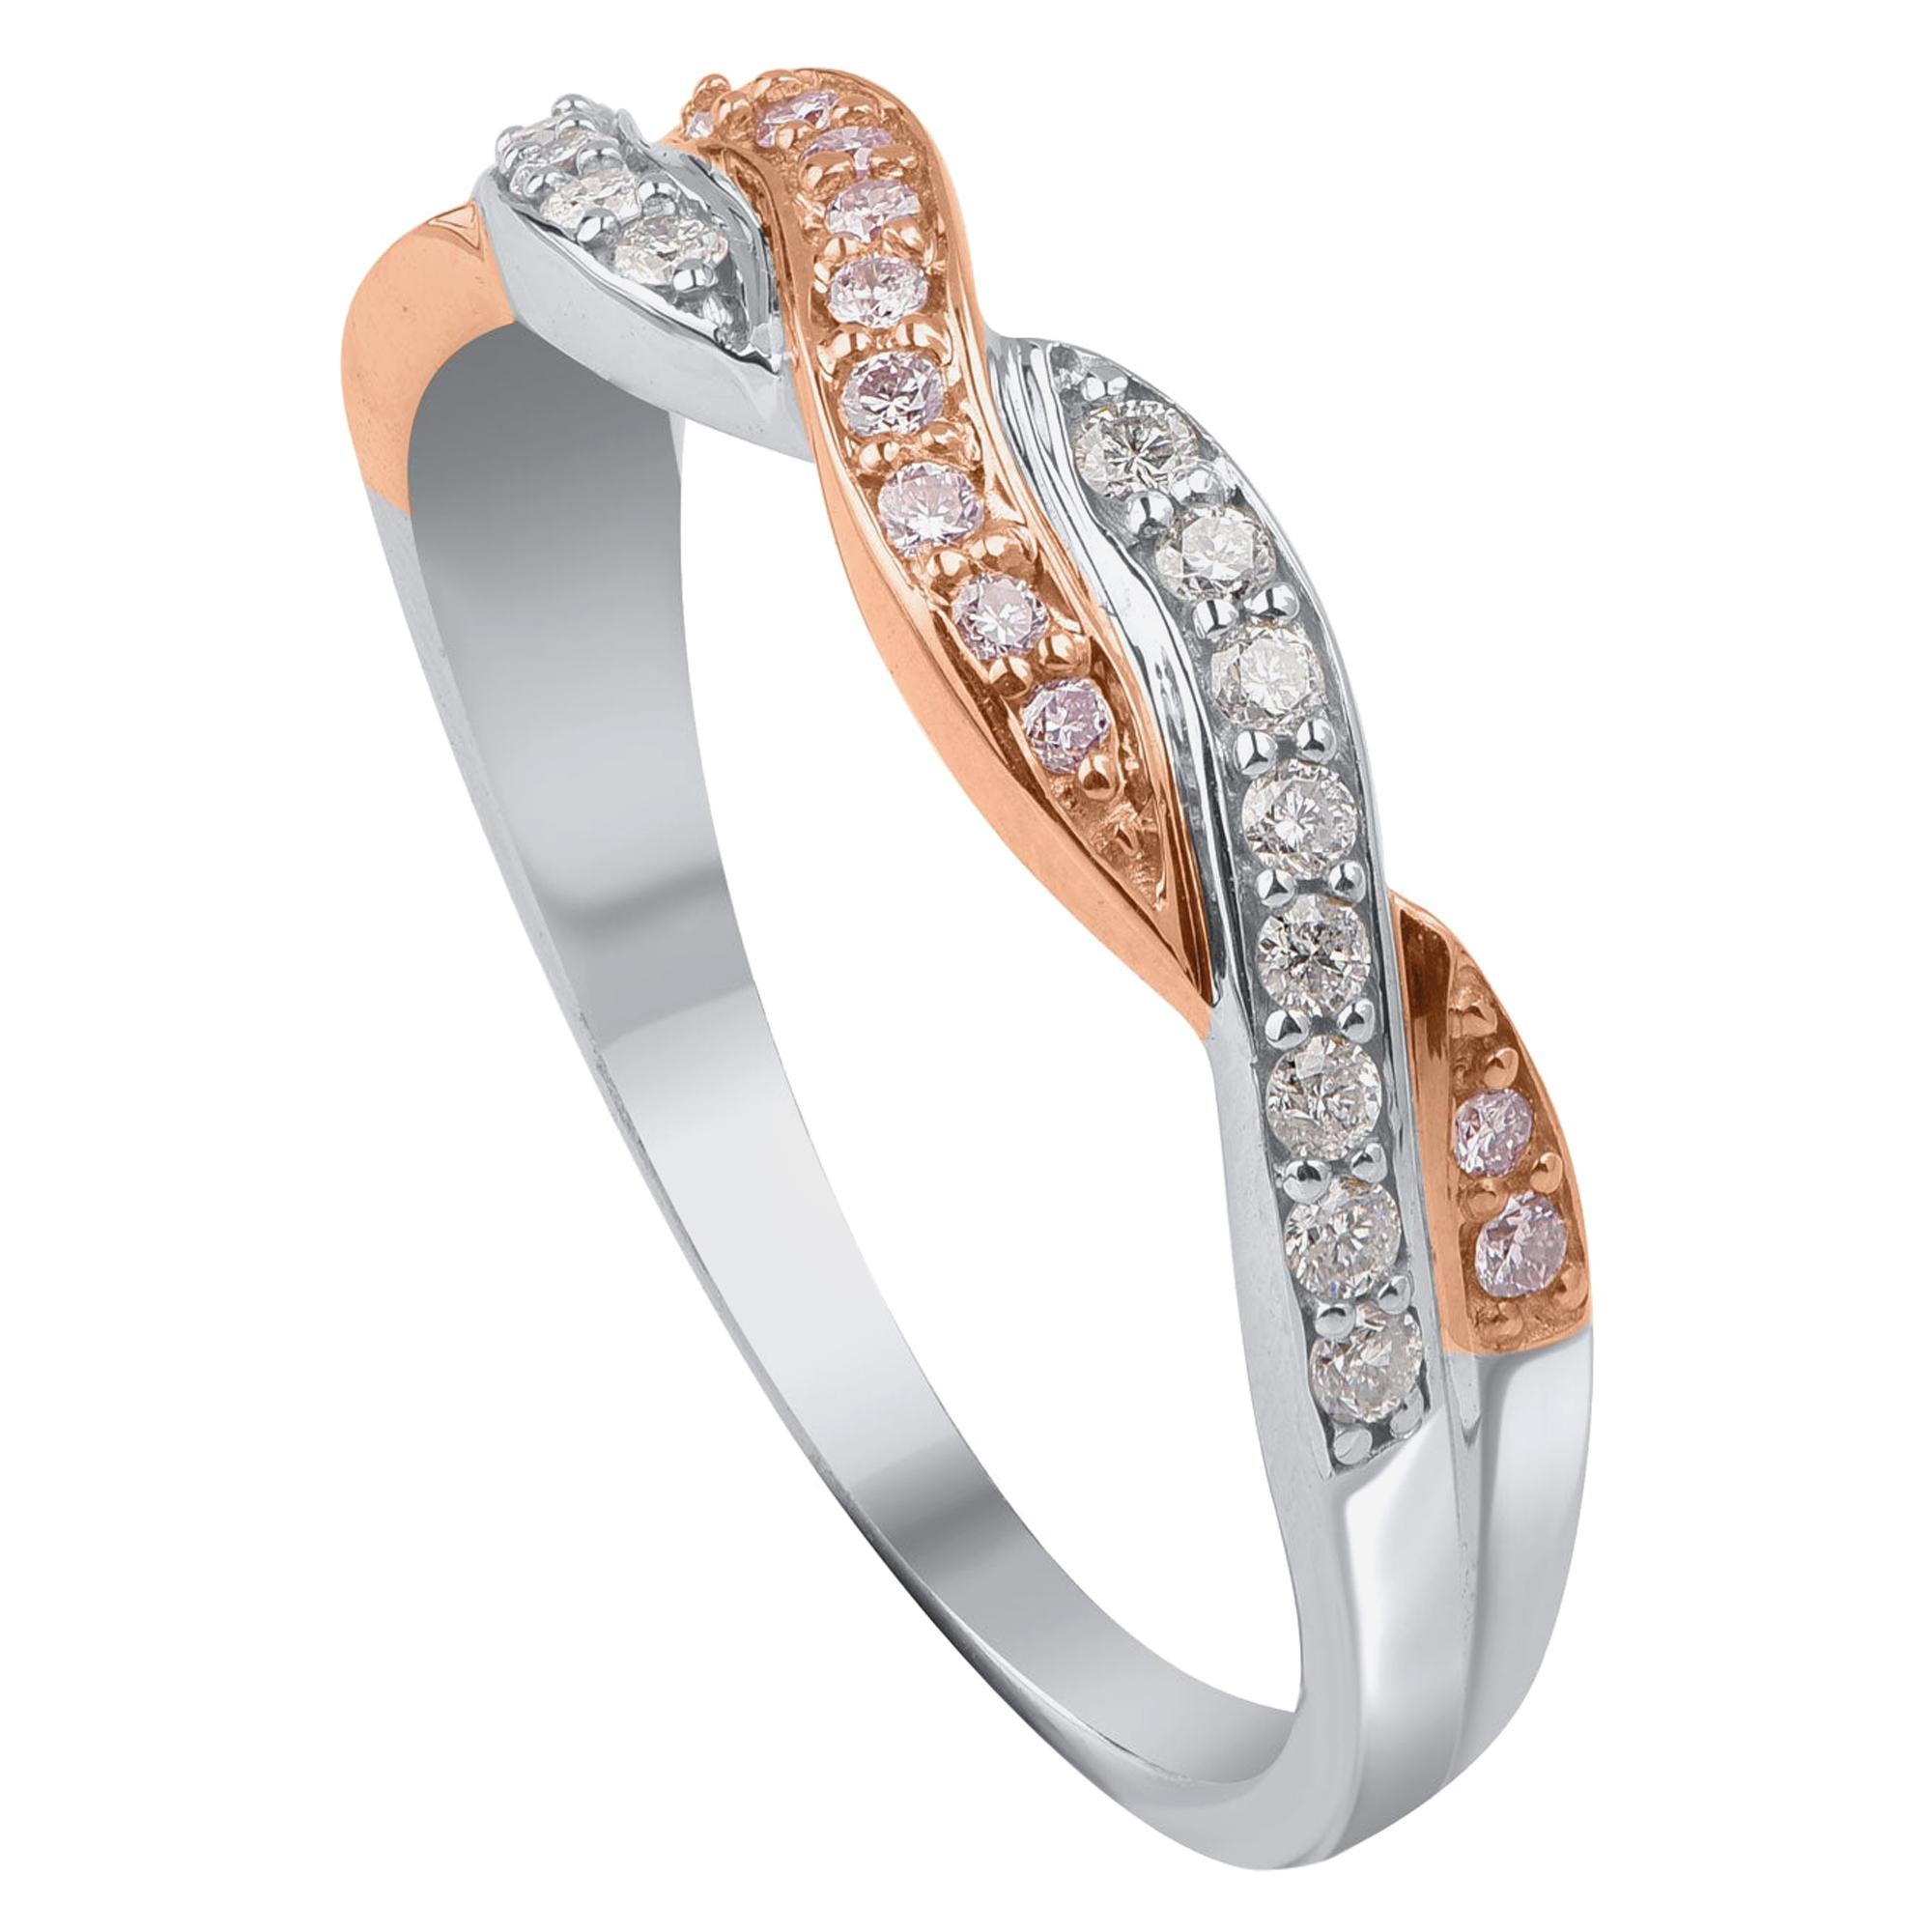 Studded with 16 round white and 13 round natural pink rosé diamonds in pave setting and crafted by experts in 18 kt white and rose gold. Diamonds are H-I Color, I2 Clarity. 

Ring size is US size 7 and can be resized on request.